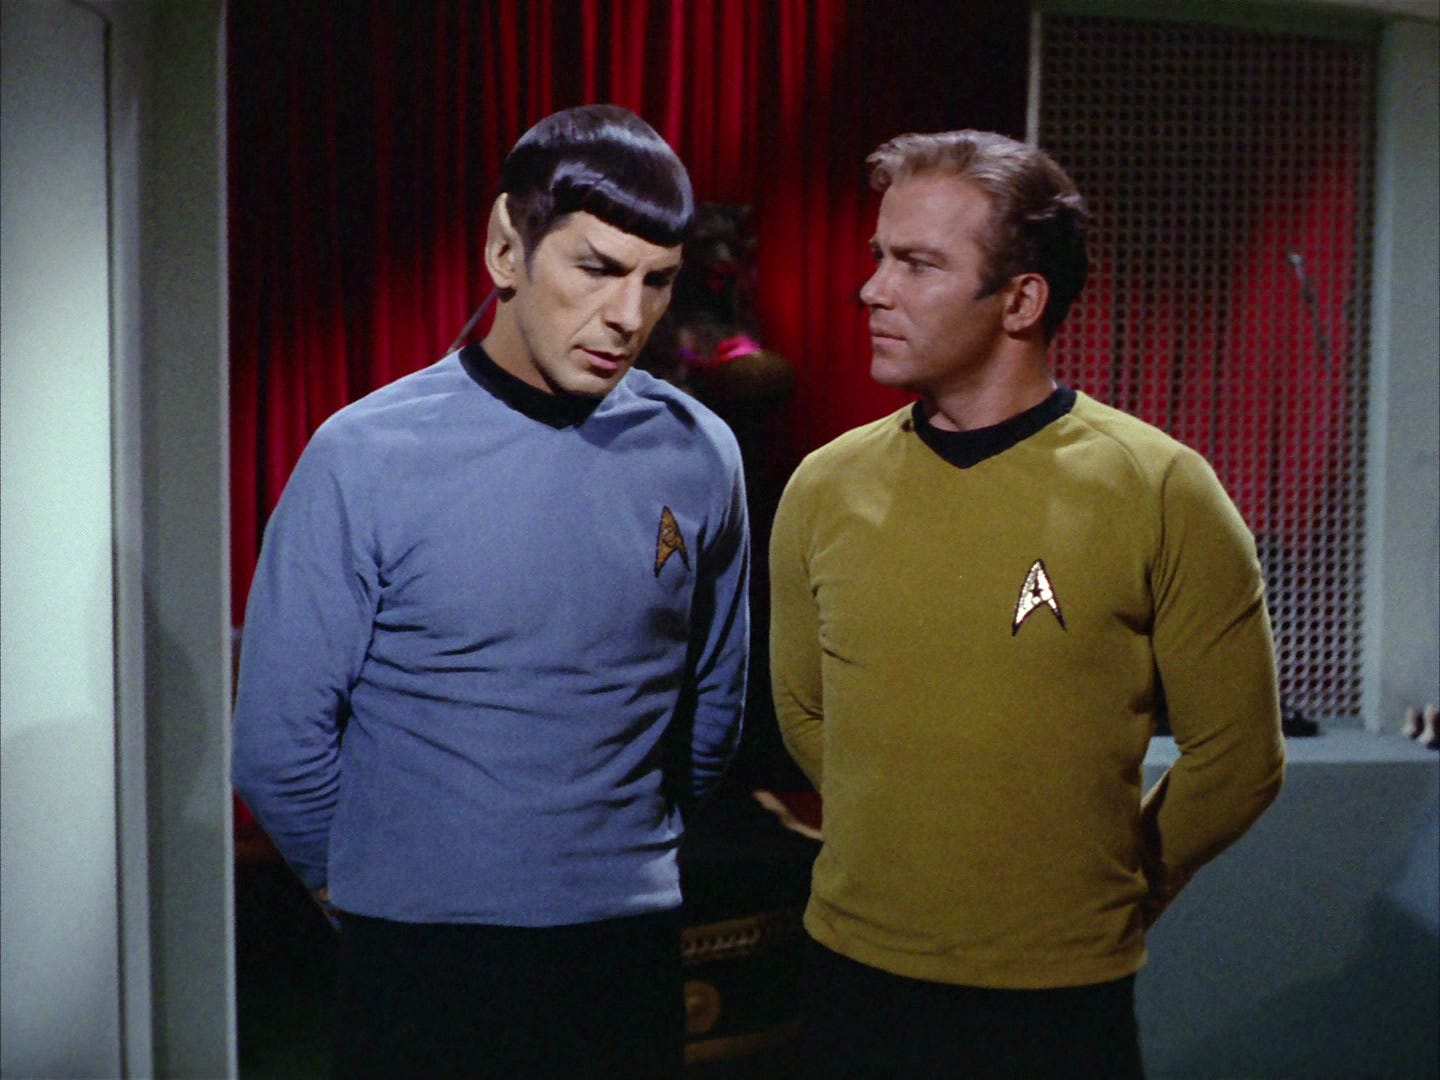 Is That Star Trek Uniform Blue and Black or Gold and White?